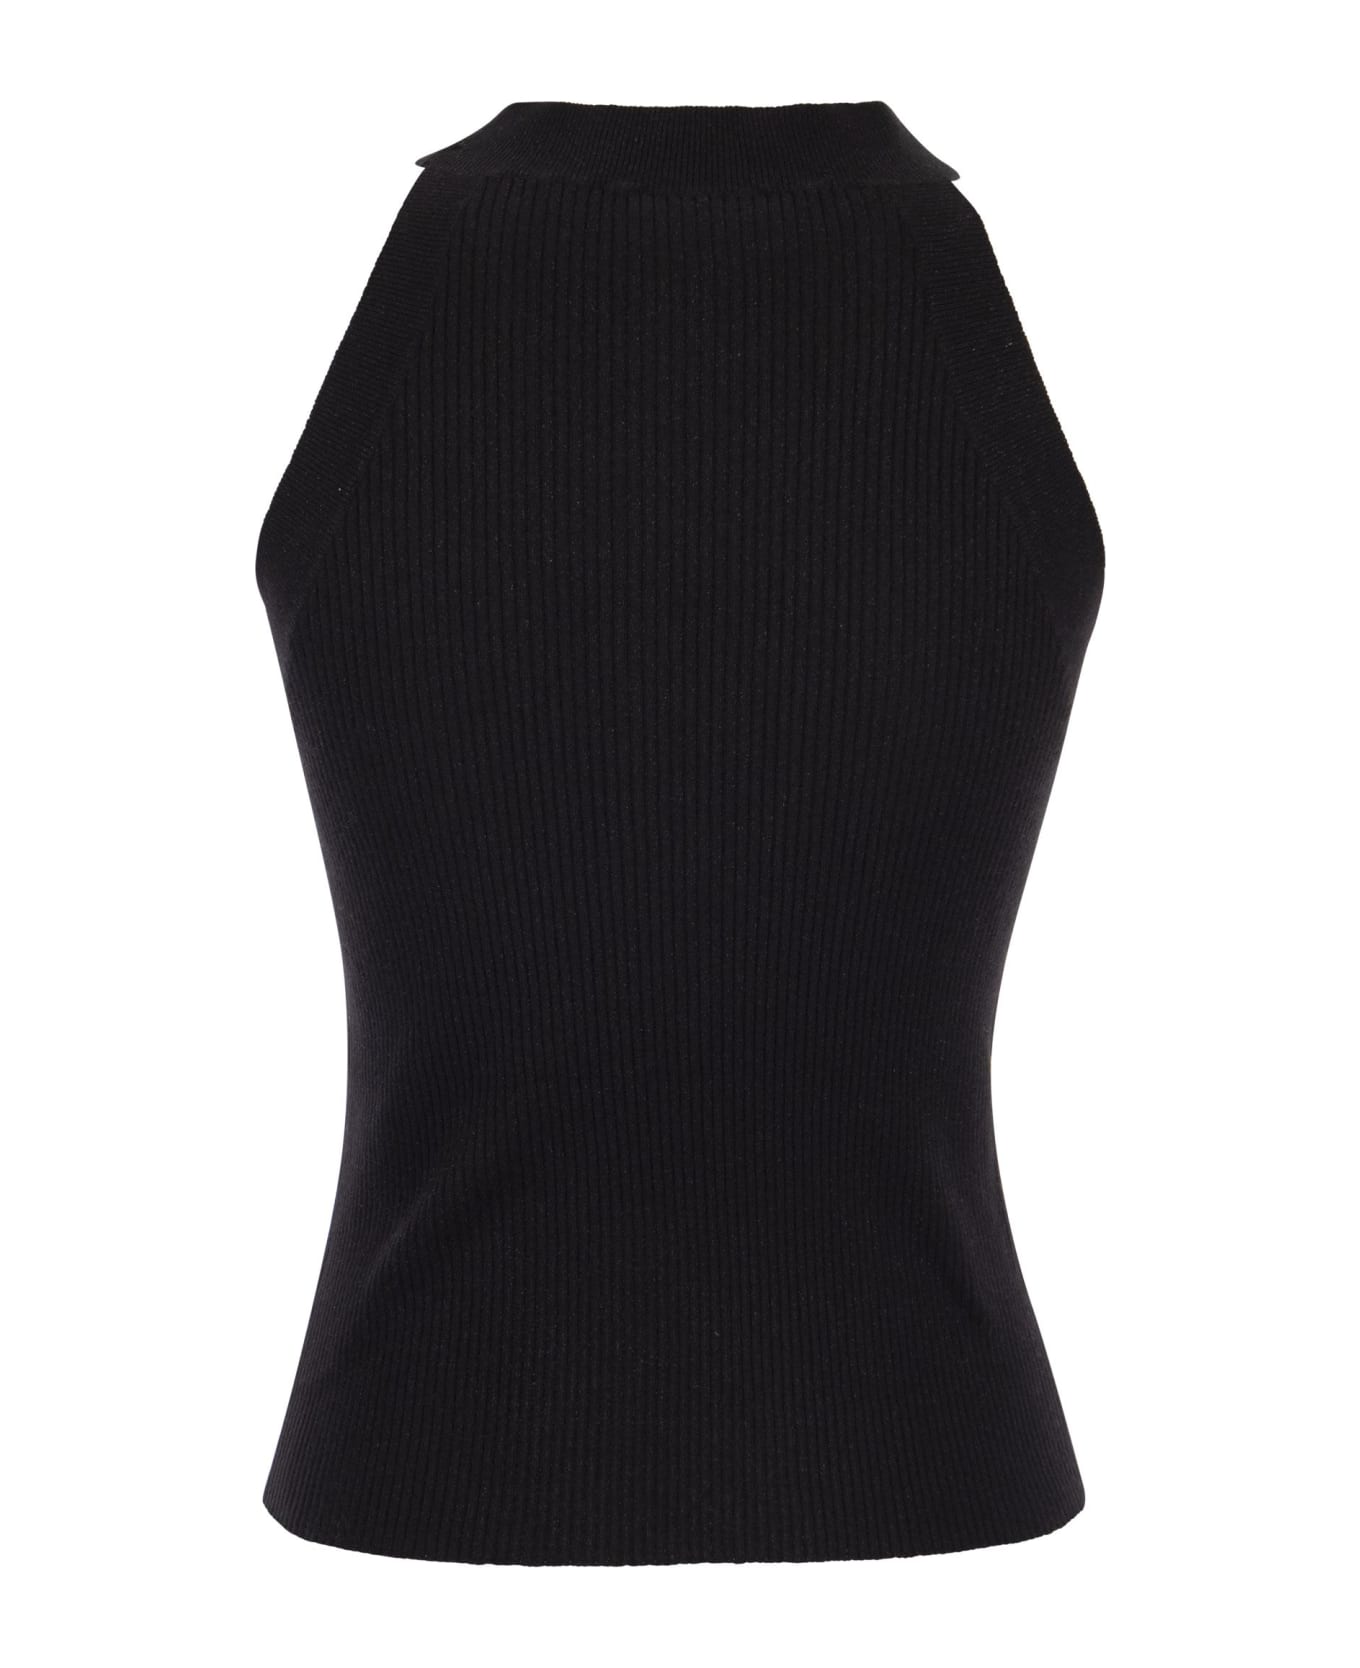 Brunello Cucinelli Cashmere And Silk Ribbed Knit Top - Black タンクトップ